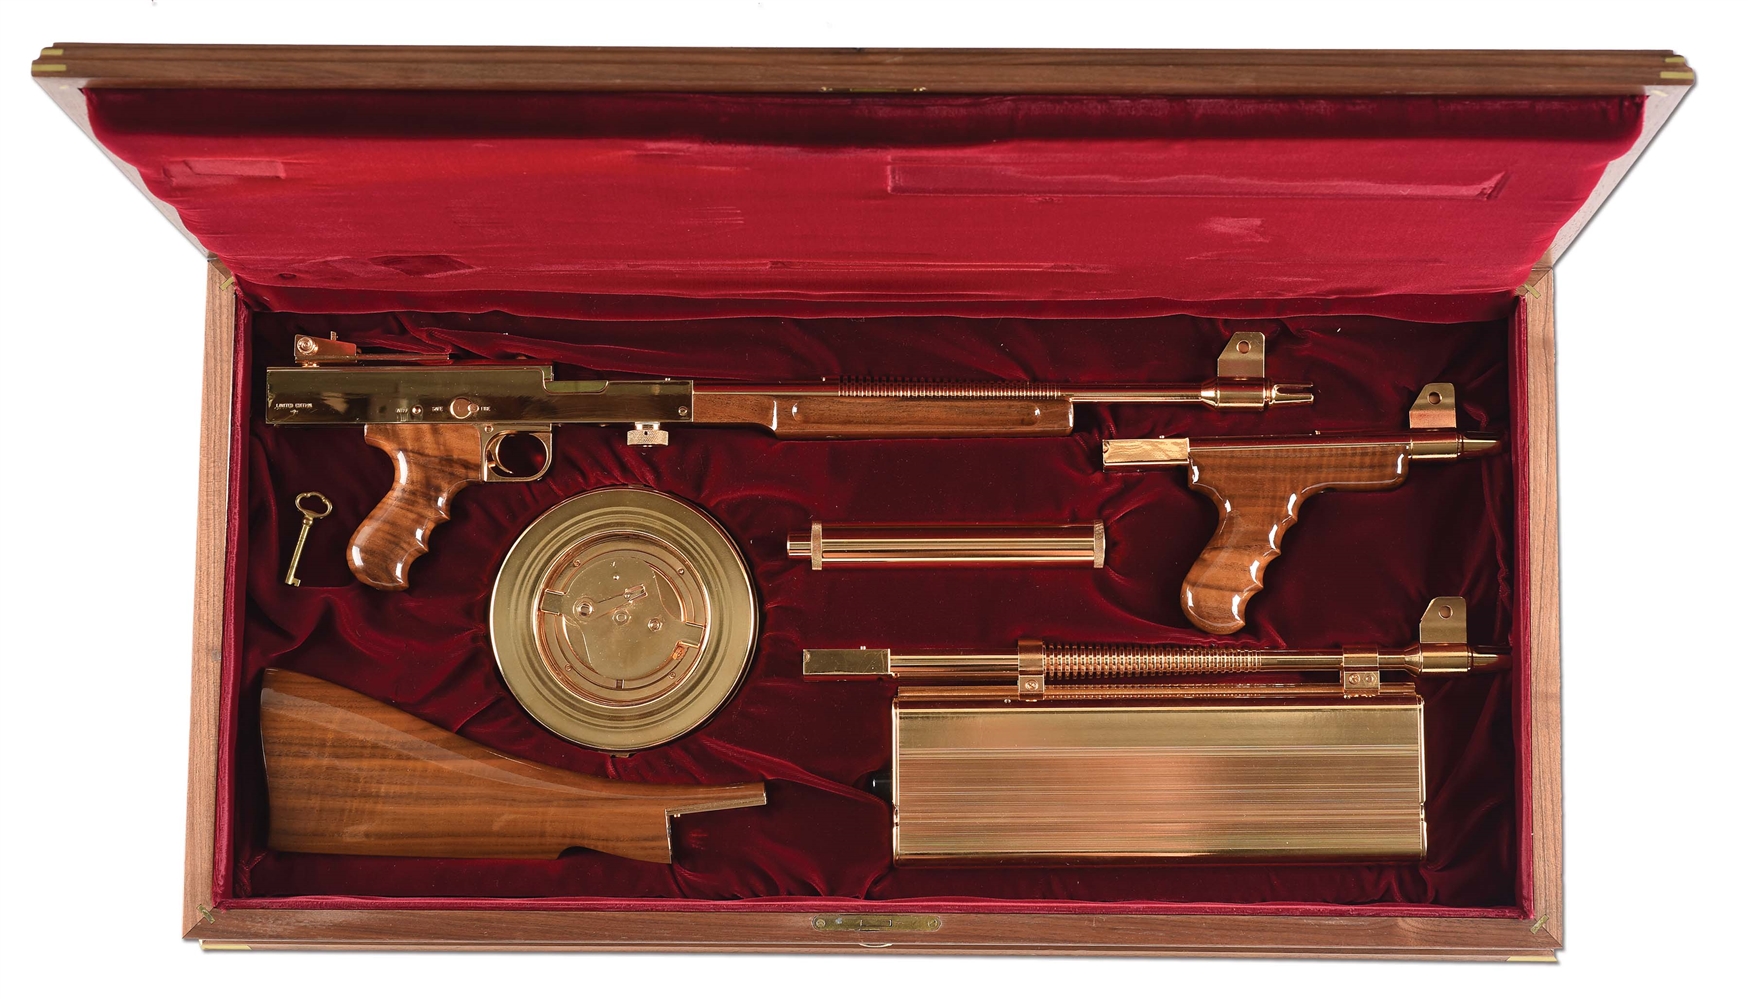 (N) ABSOLUTELY MAGNIFICENT UNFIRED GOLD M-2 LIMITED EDITION AMERICAN ARMS – AMERICAN 180 MACHINE GUN WITH LASER-LOK SIGHT, SILENCER, AND ORIGINAL FACTORY WOODEN DISPLAY CASE (FULLY TRANSFERABLE)